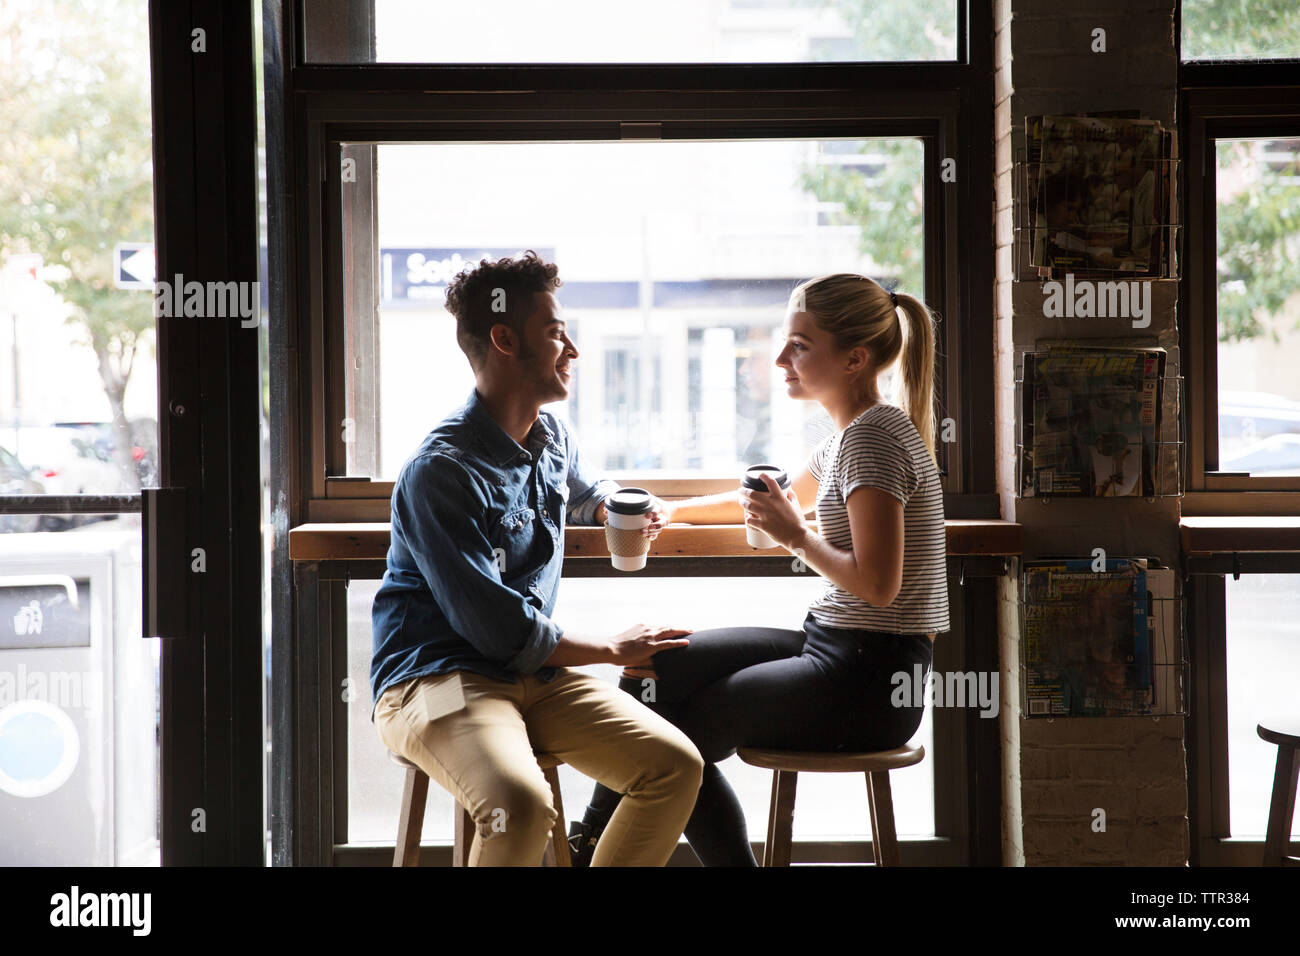 Smiling couple talking while sitting by window at cafe Stock Photo